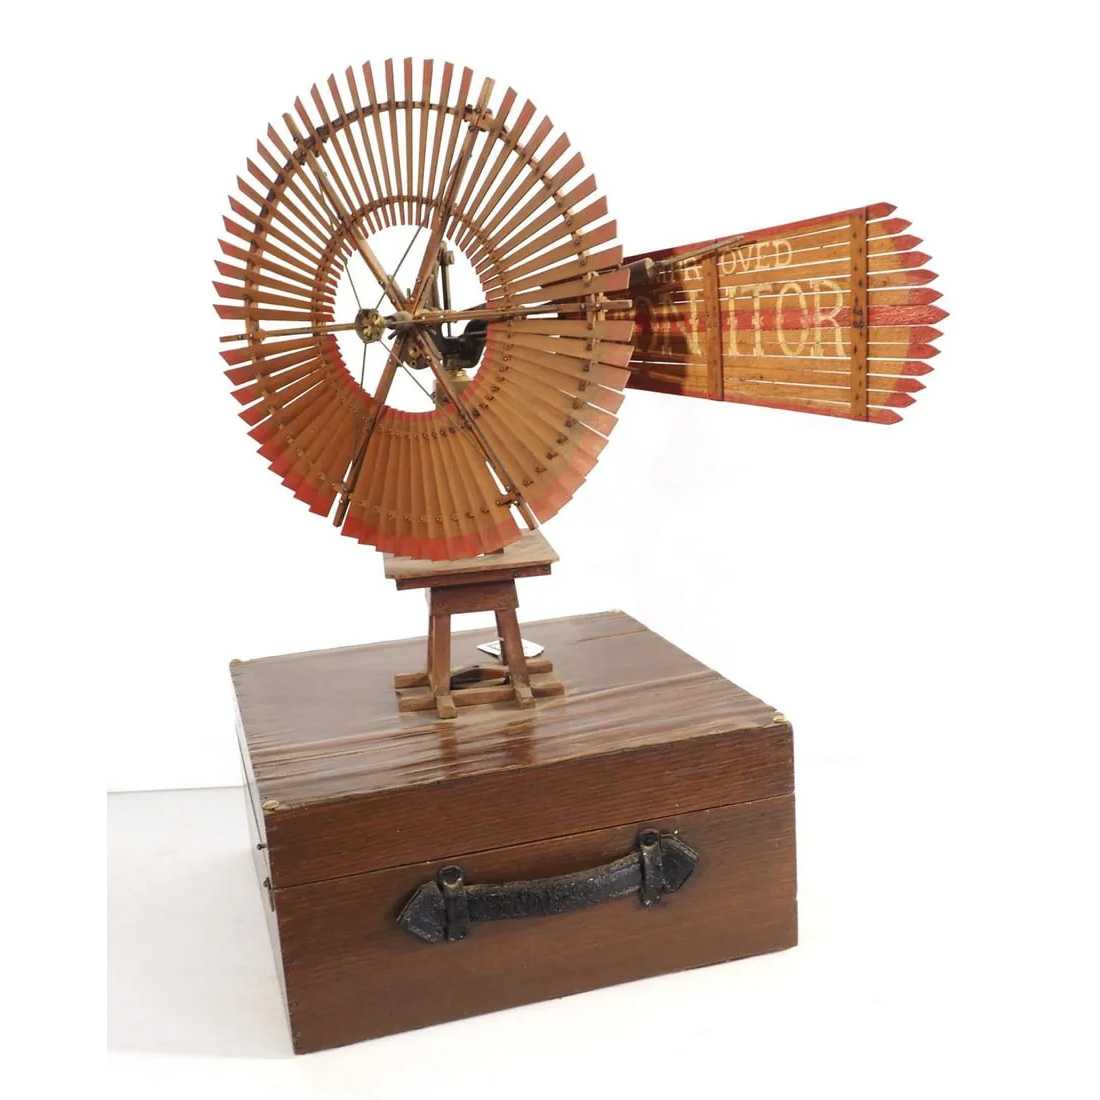 Monitor Mfg. Co. salesman's sample windmill, which sold for $17,500 ($21,000 with buyer’s premium) at Chupp.